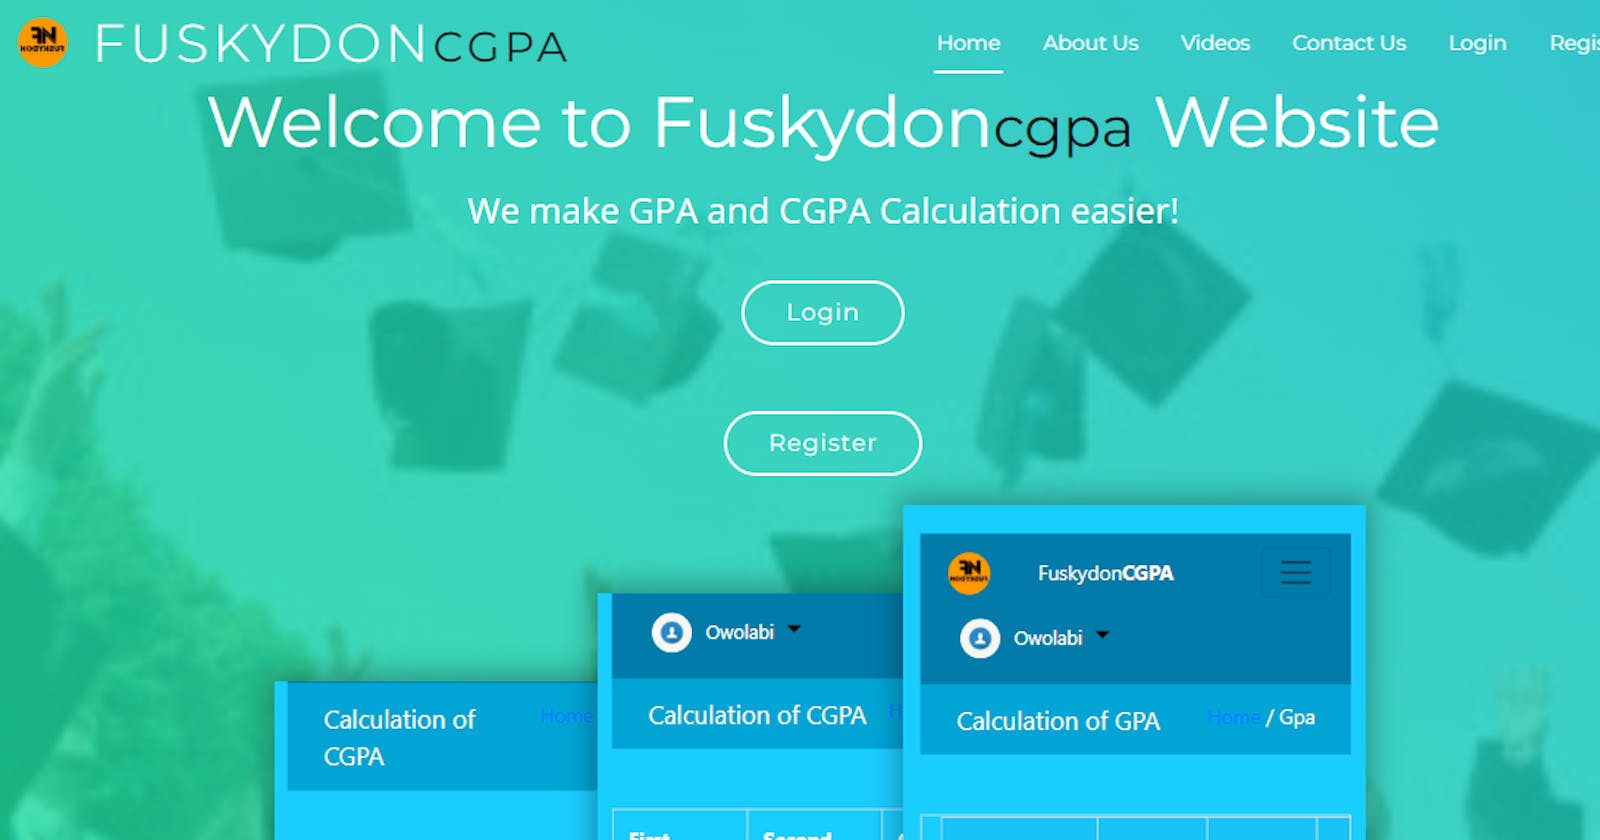 "From Frustration to Innovation: The Story of How I Created a Website to Help Students Calculate Their GPA"